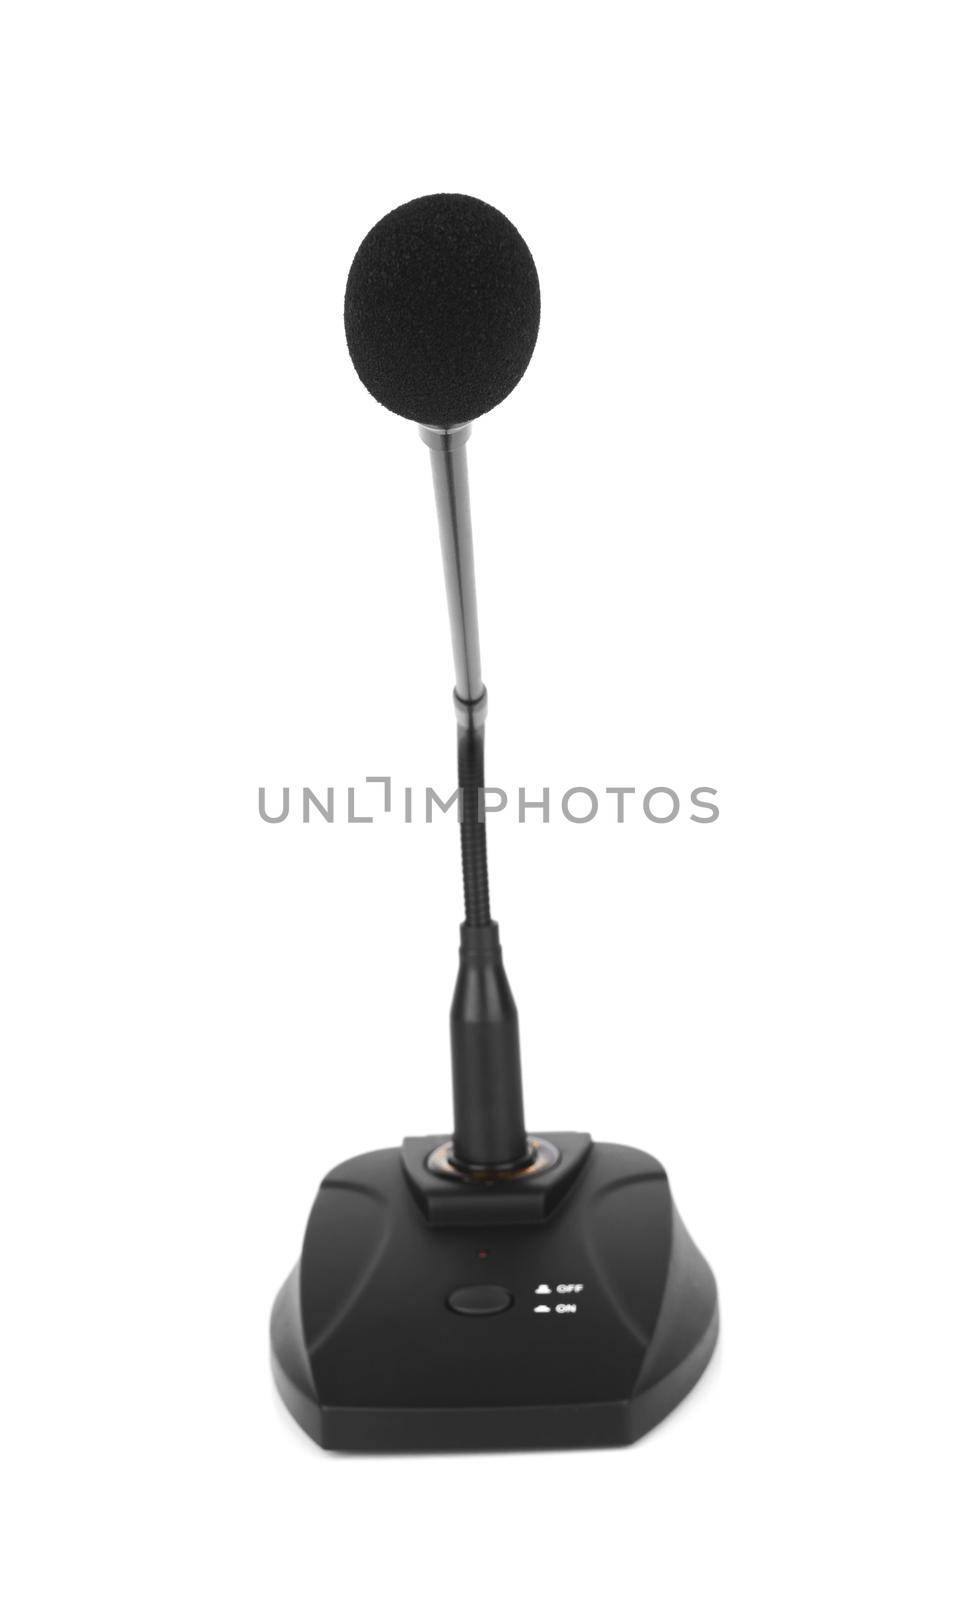 Meeting microphone isolated on a white background